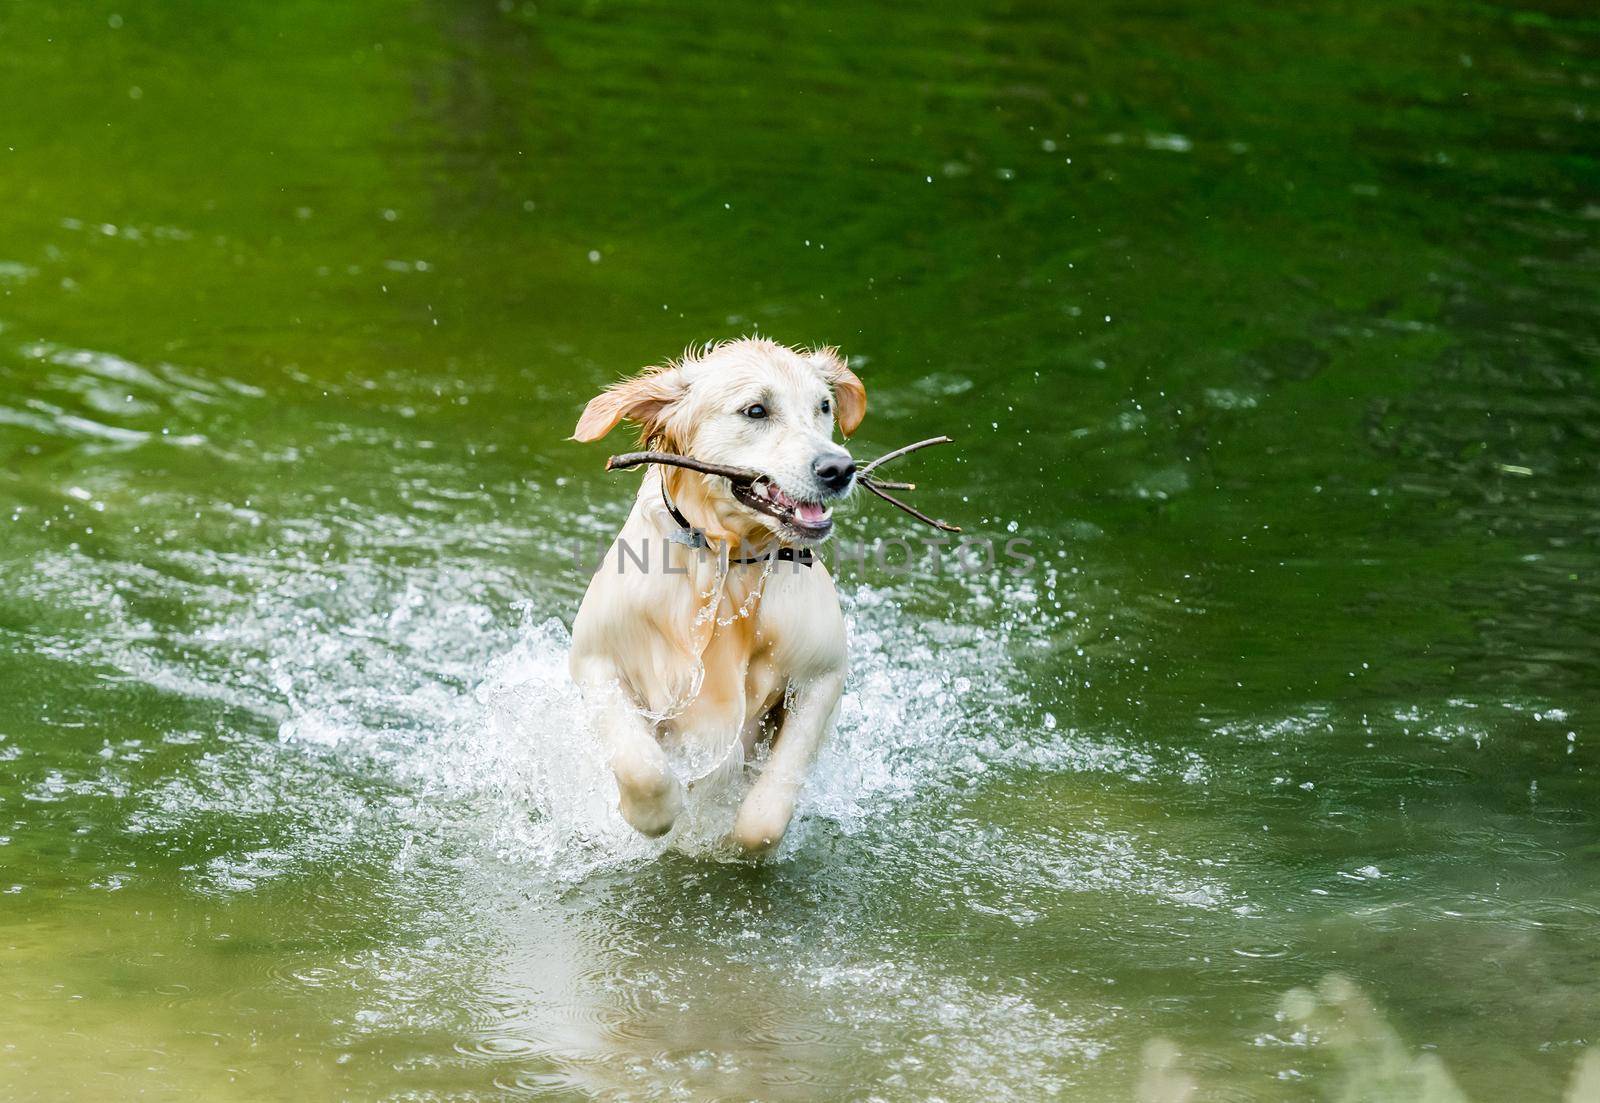 Cute dog running out of lake holding big stick in mouth